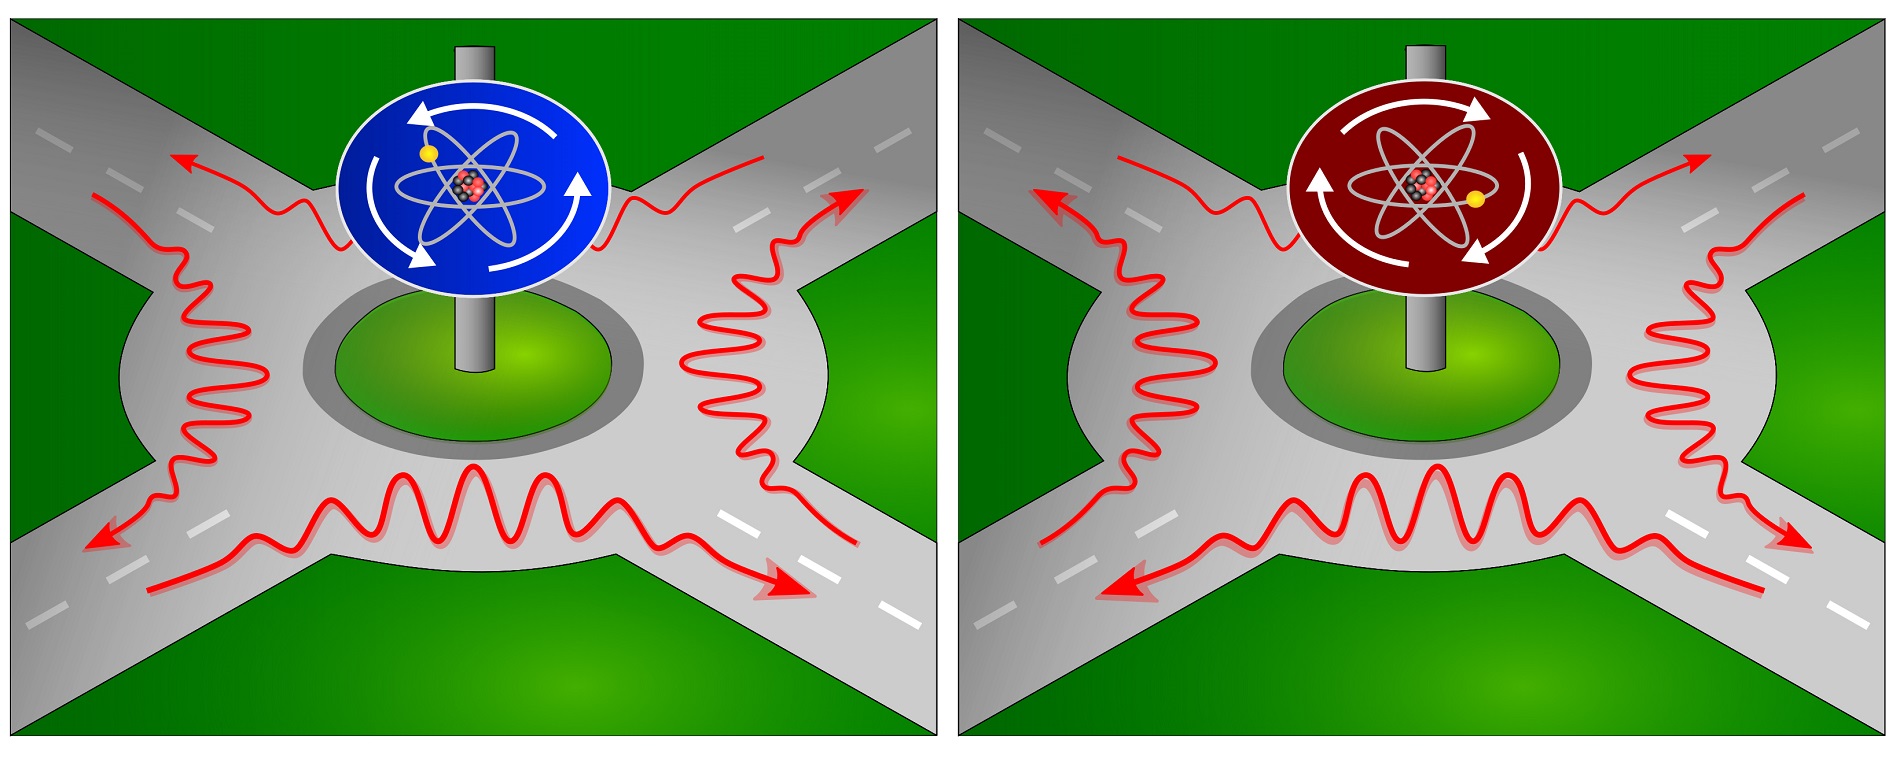 For an atomic state light travels clockwise in the roundabout